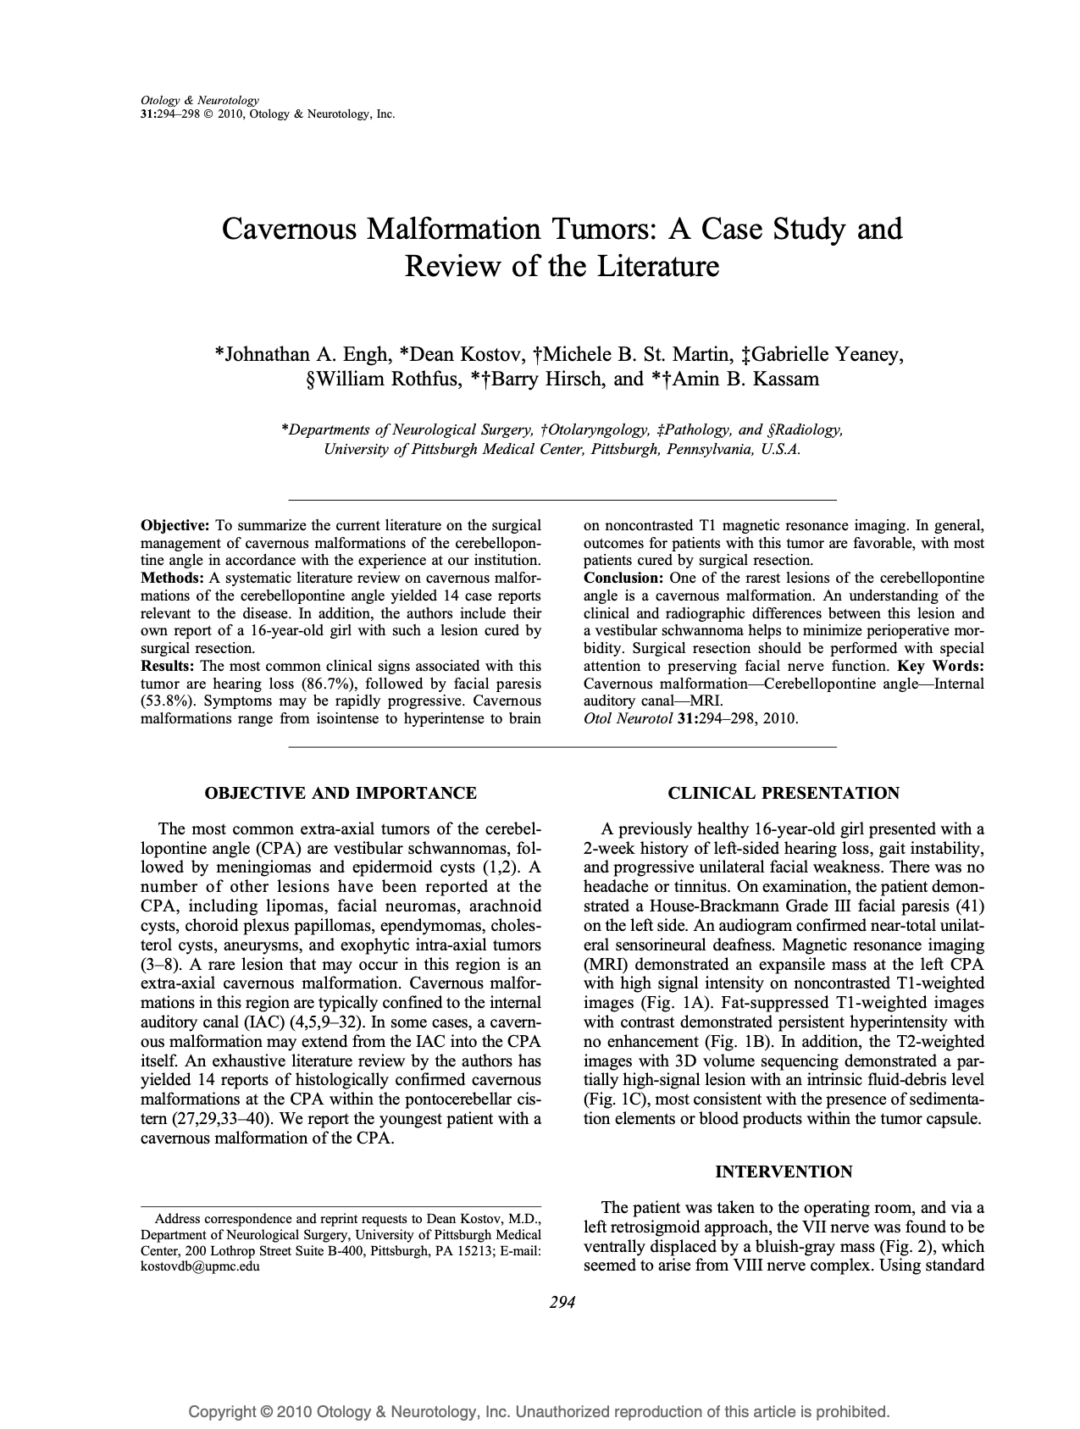 Cavernous Malformation Tumors: A Case Study and Review of the Literature